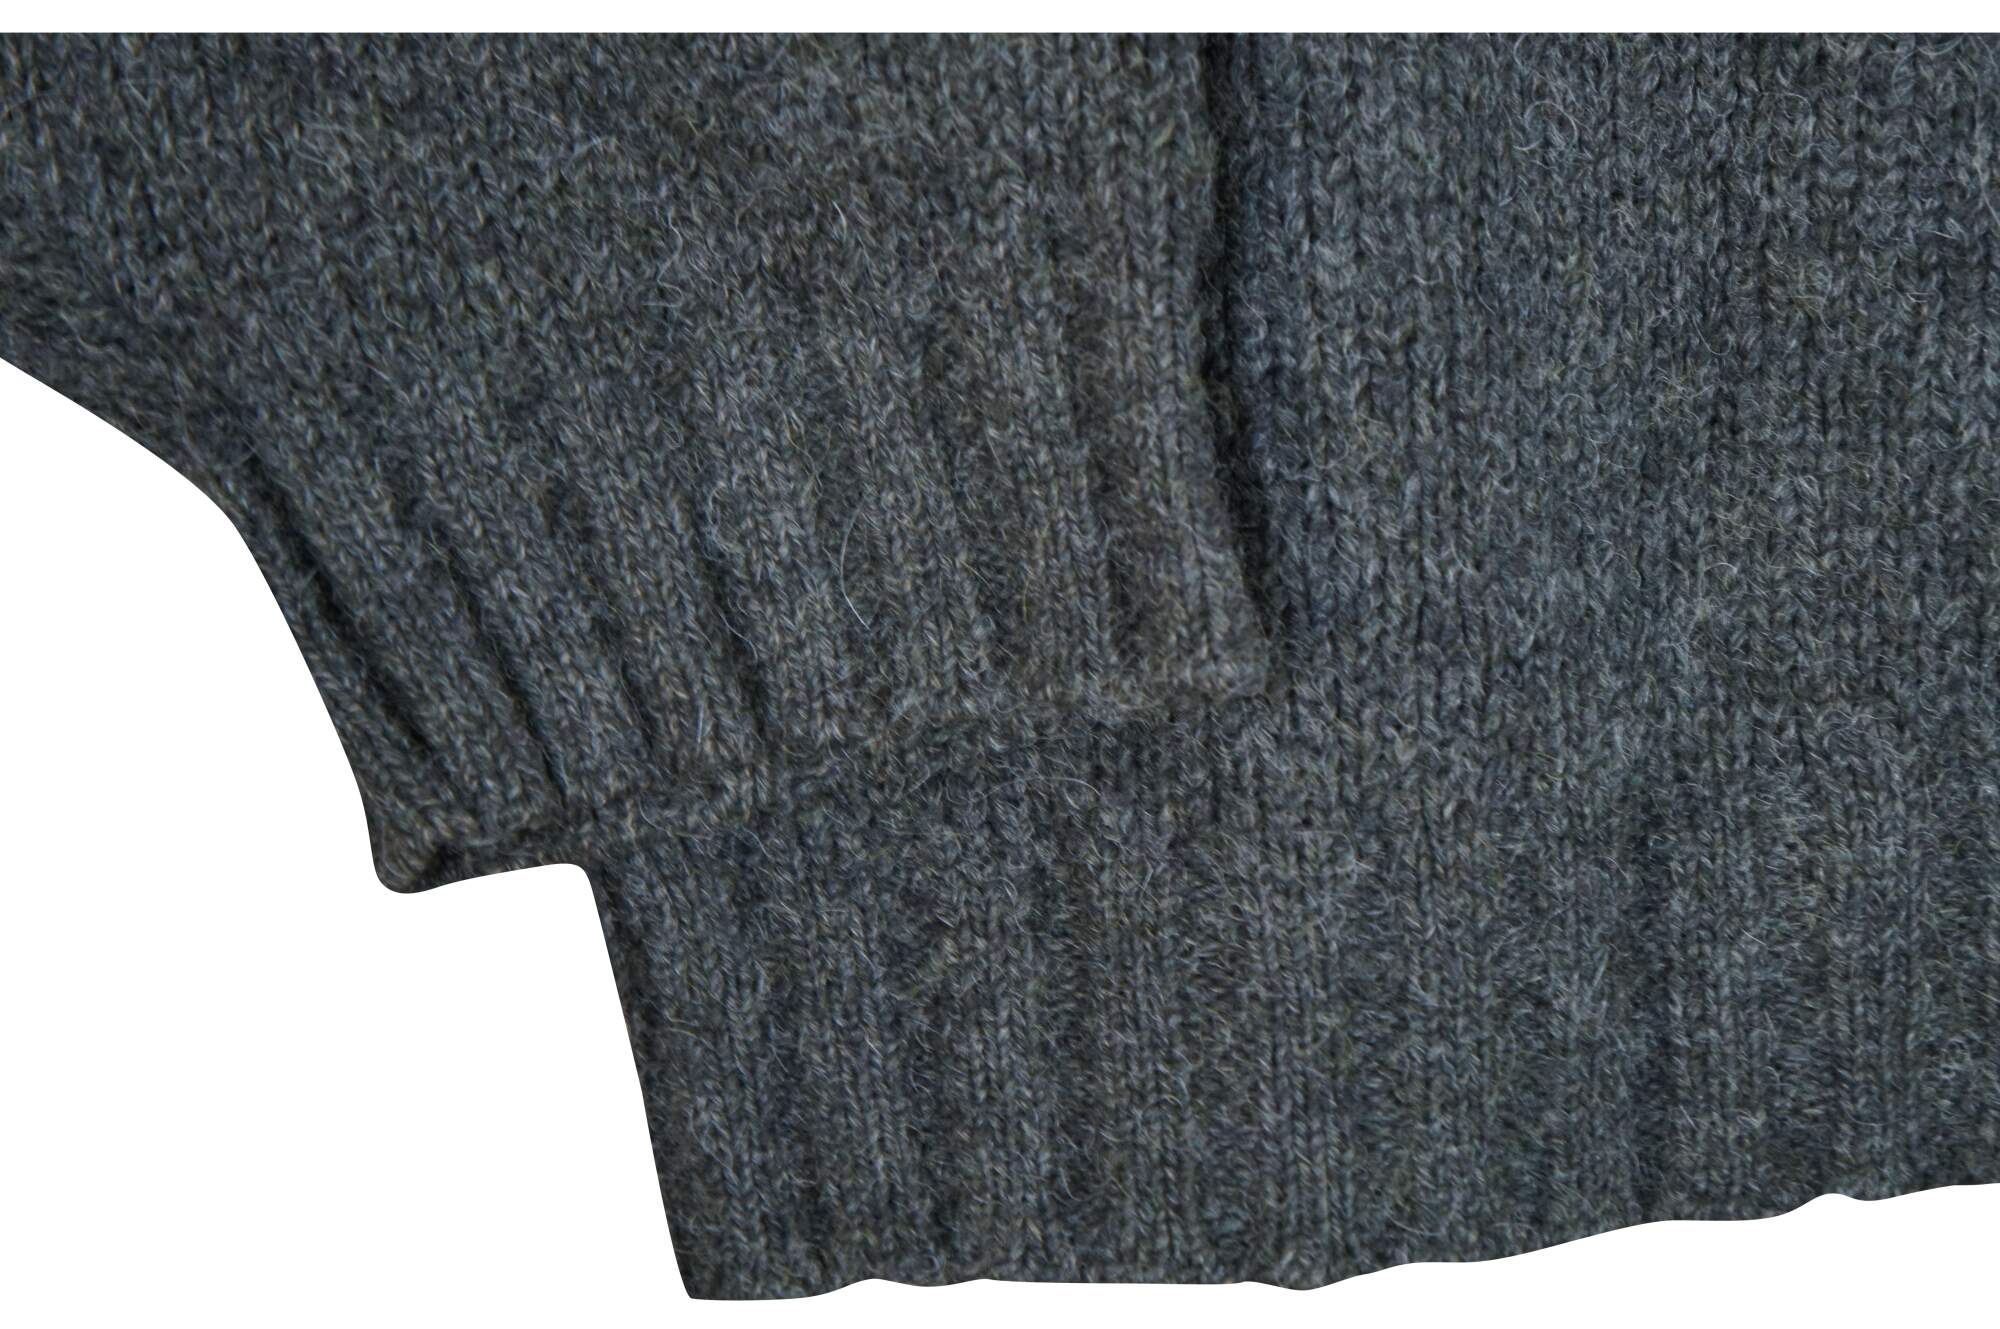 Men's L L Bean Grey Wool Sweater with Suede Elbow Patches - clothing &  accessories - by owner - apparel sale 